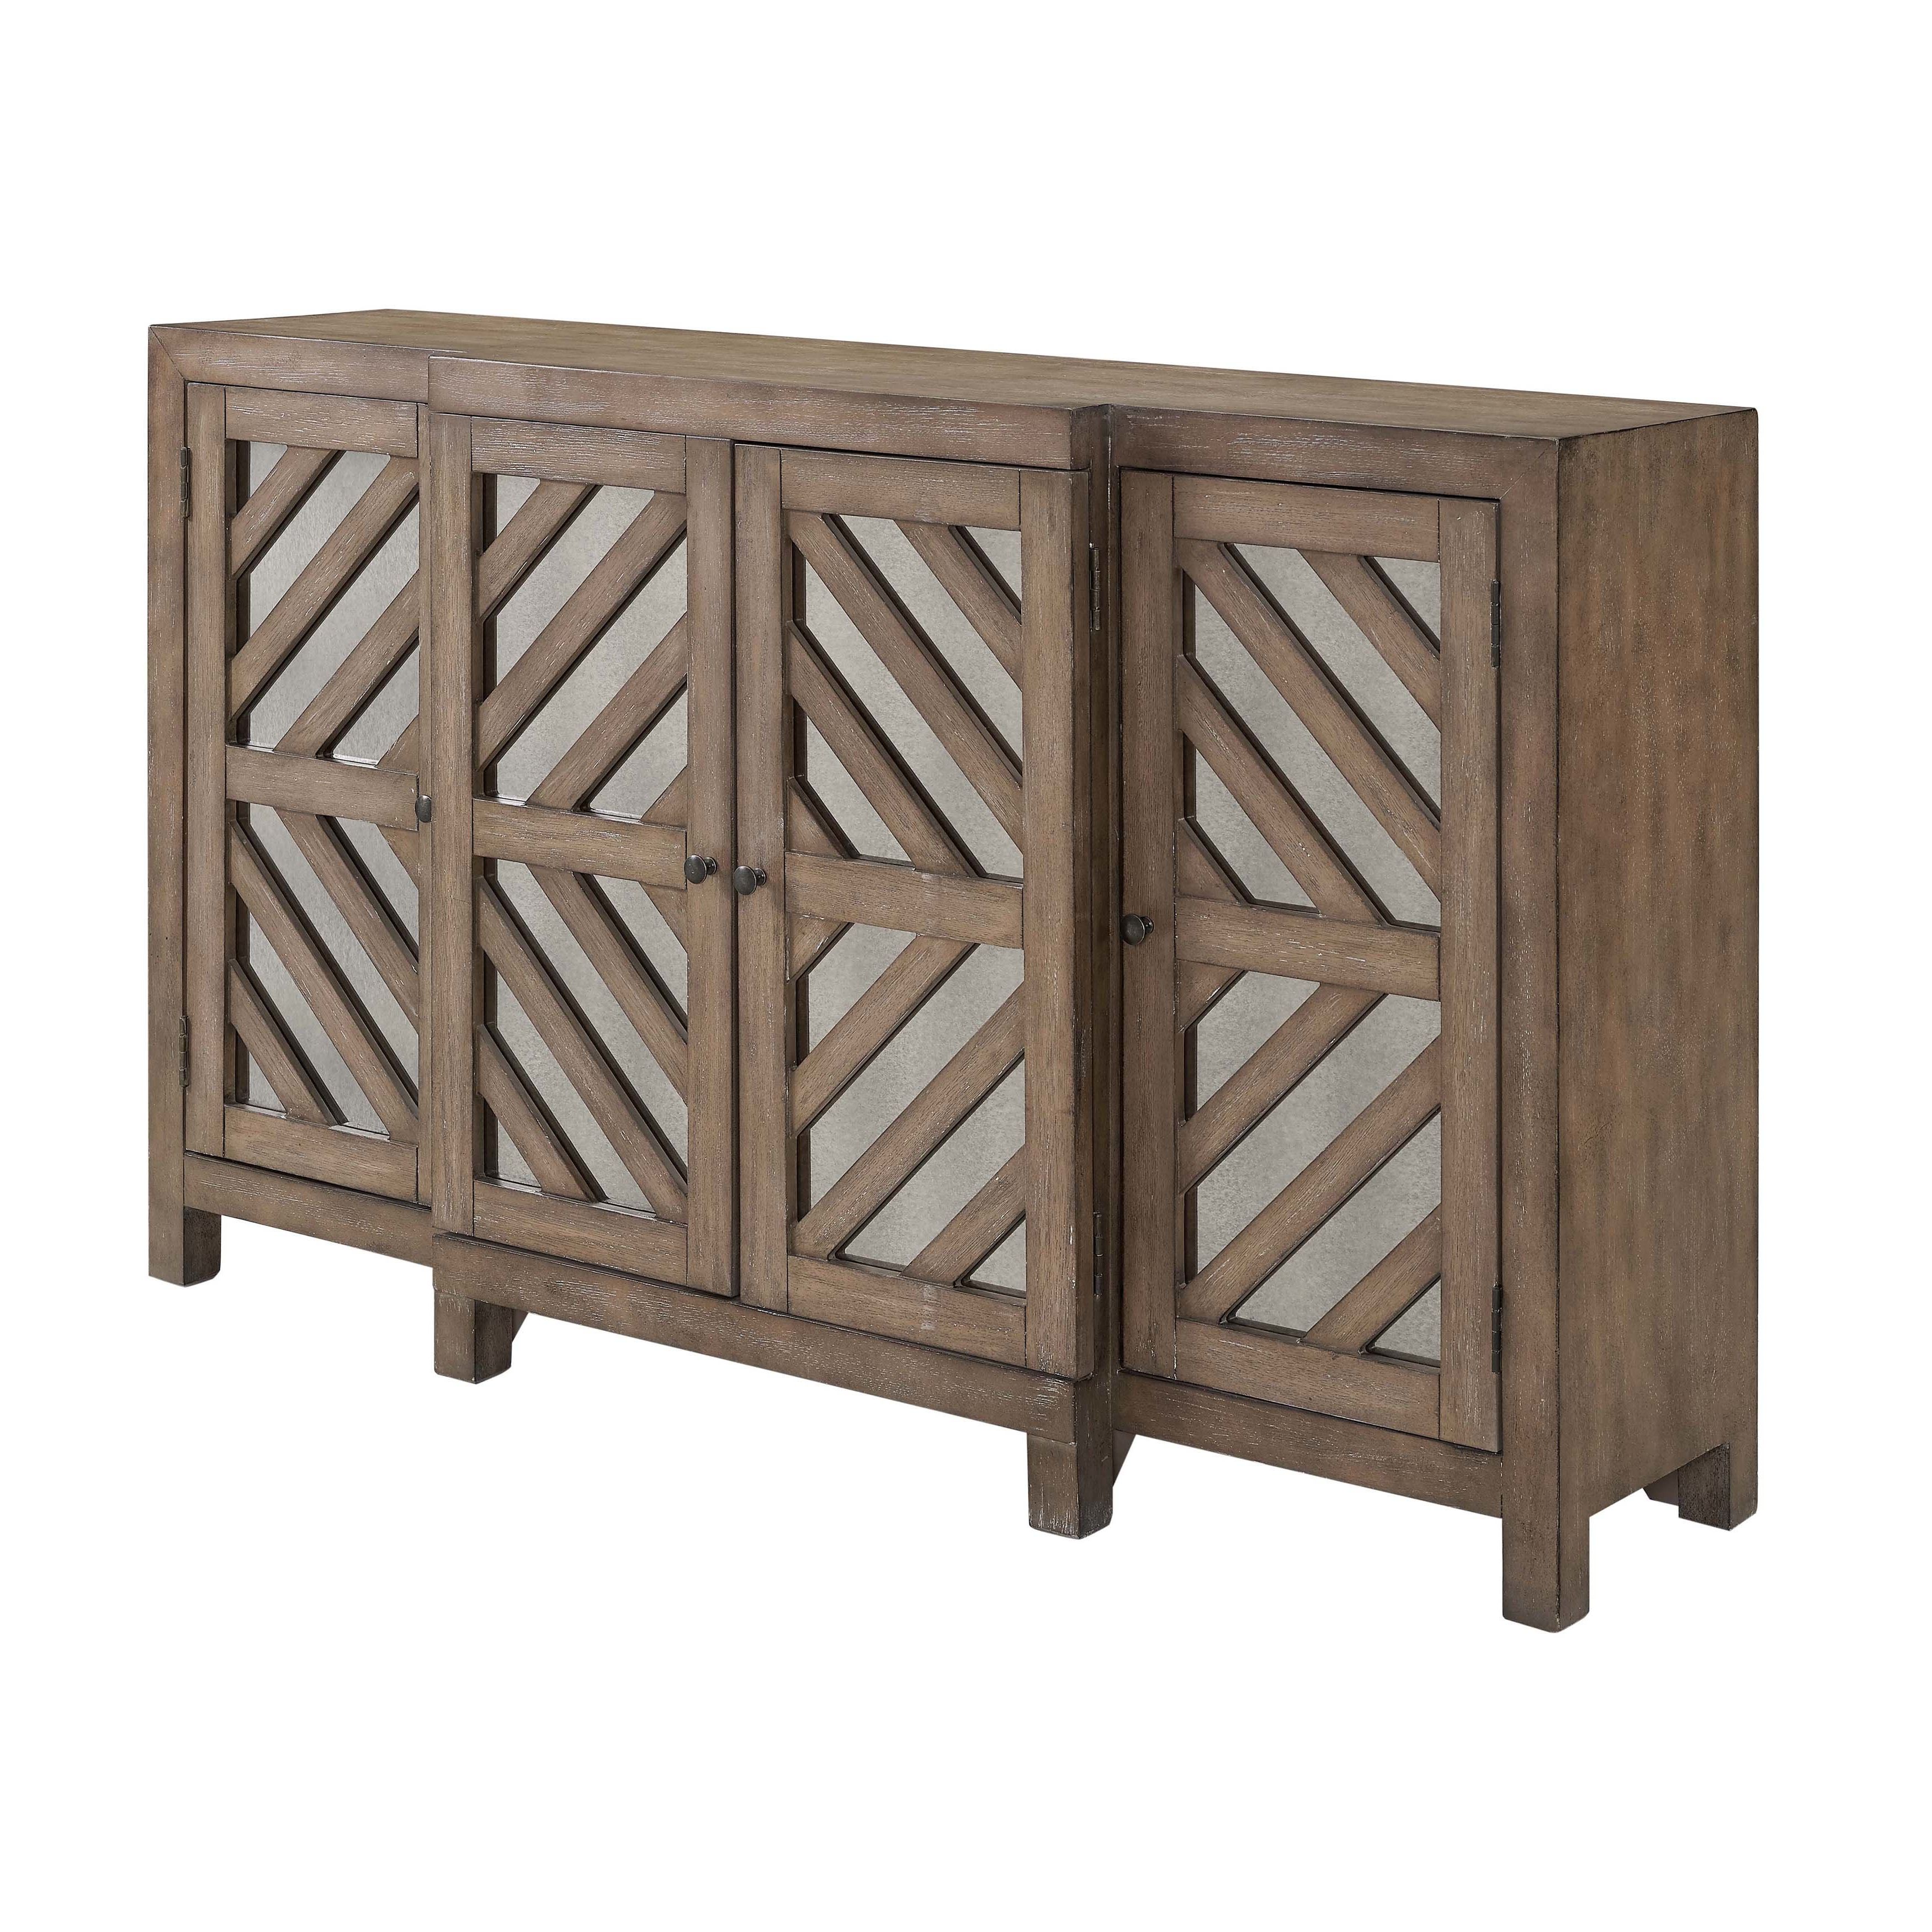 Modern & Contemporary Deny Credenza | Allmodern Intended For Geometric Shapes Credenzas (View 16 of 20)